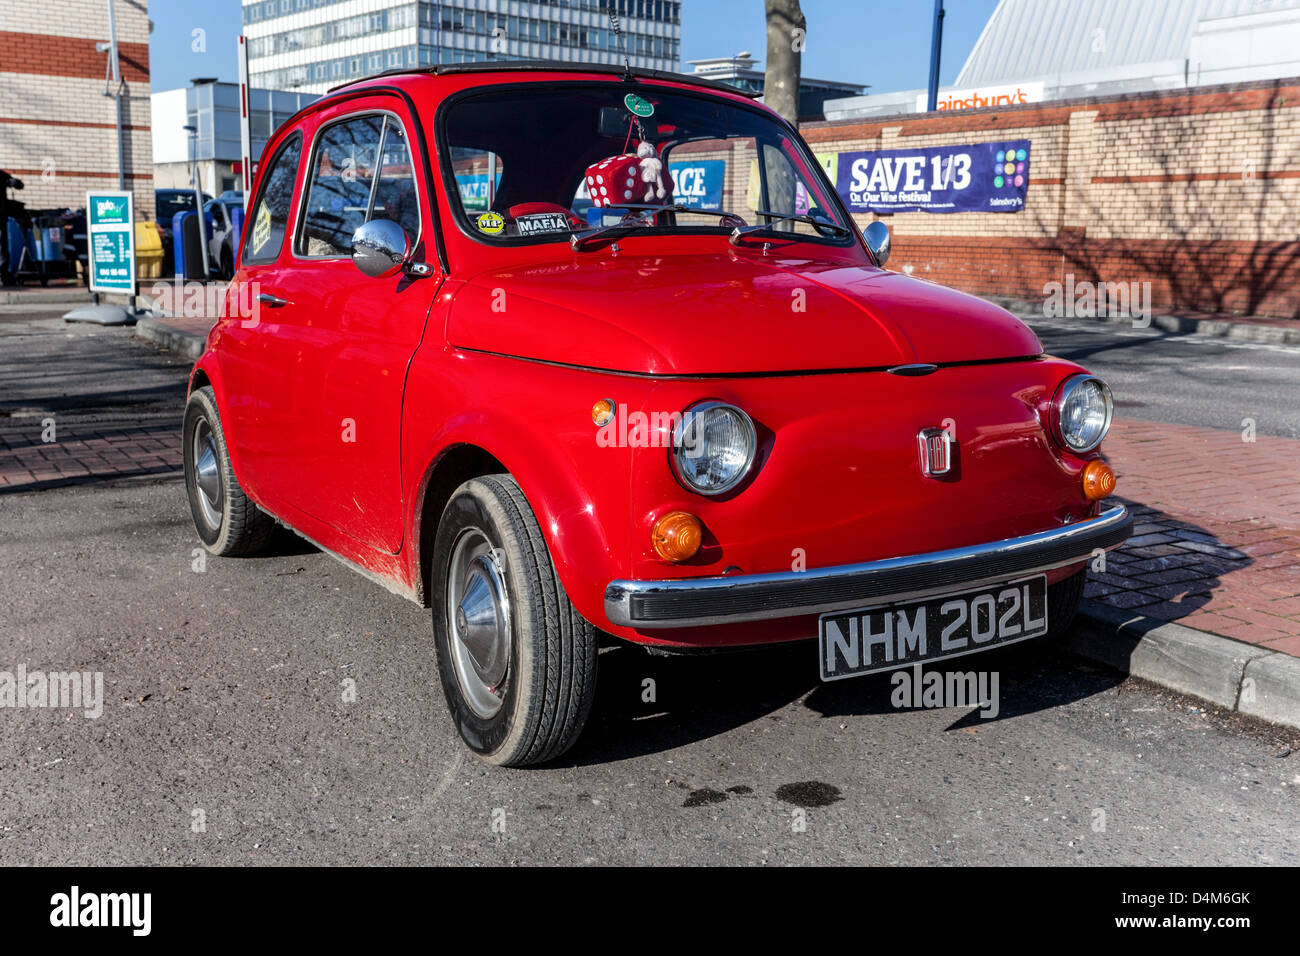 Three quarter front view of a Fiat 500 coupe automobile, London, England, UK. Stock Photo